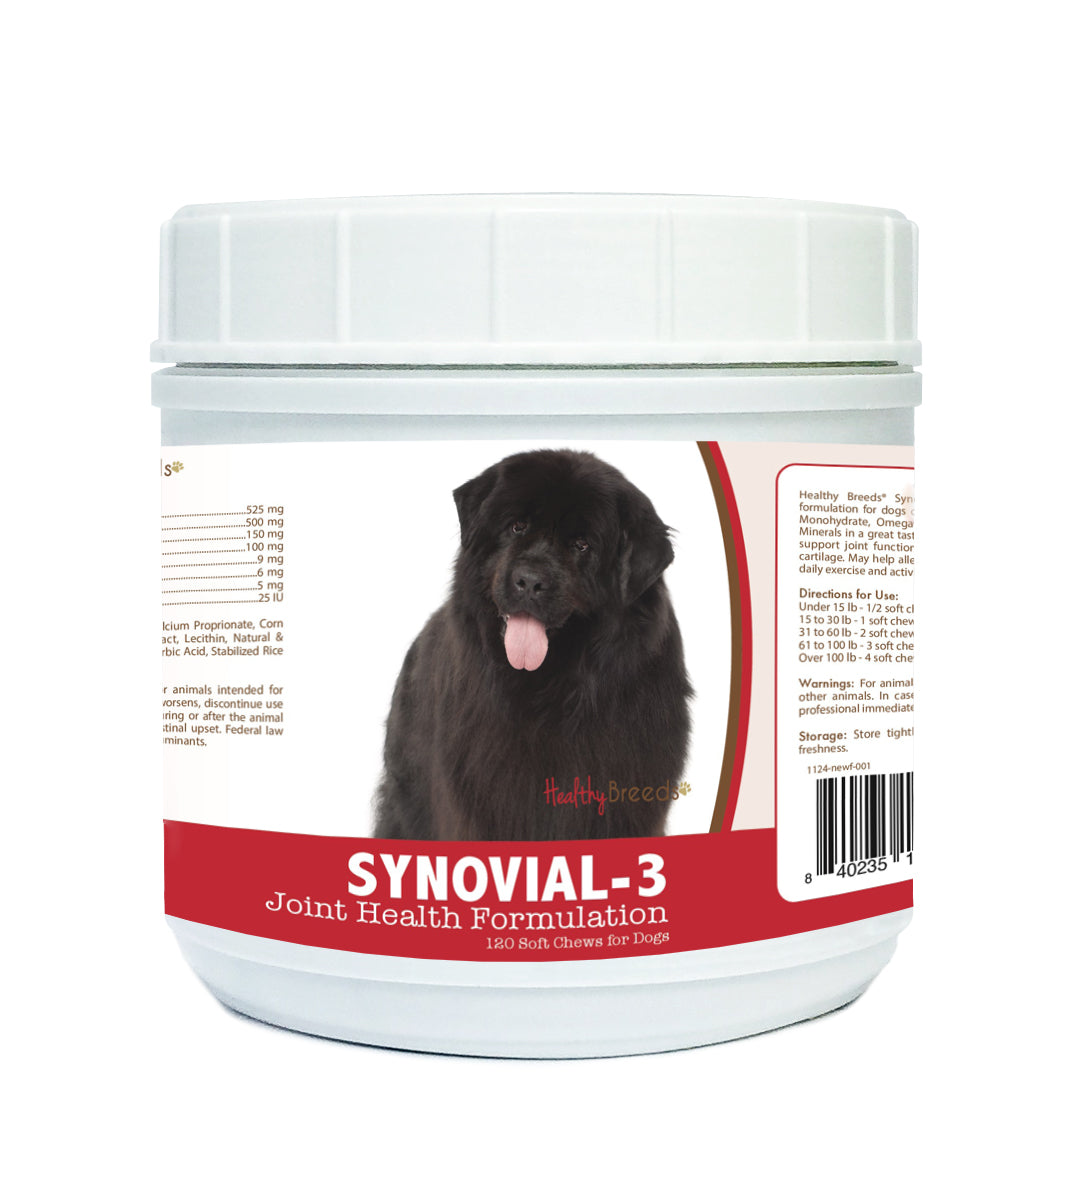 Newfoundland Synovial-3 Joint Health Formulation Soft Chews 120 Count